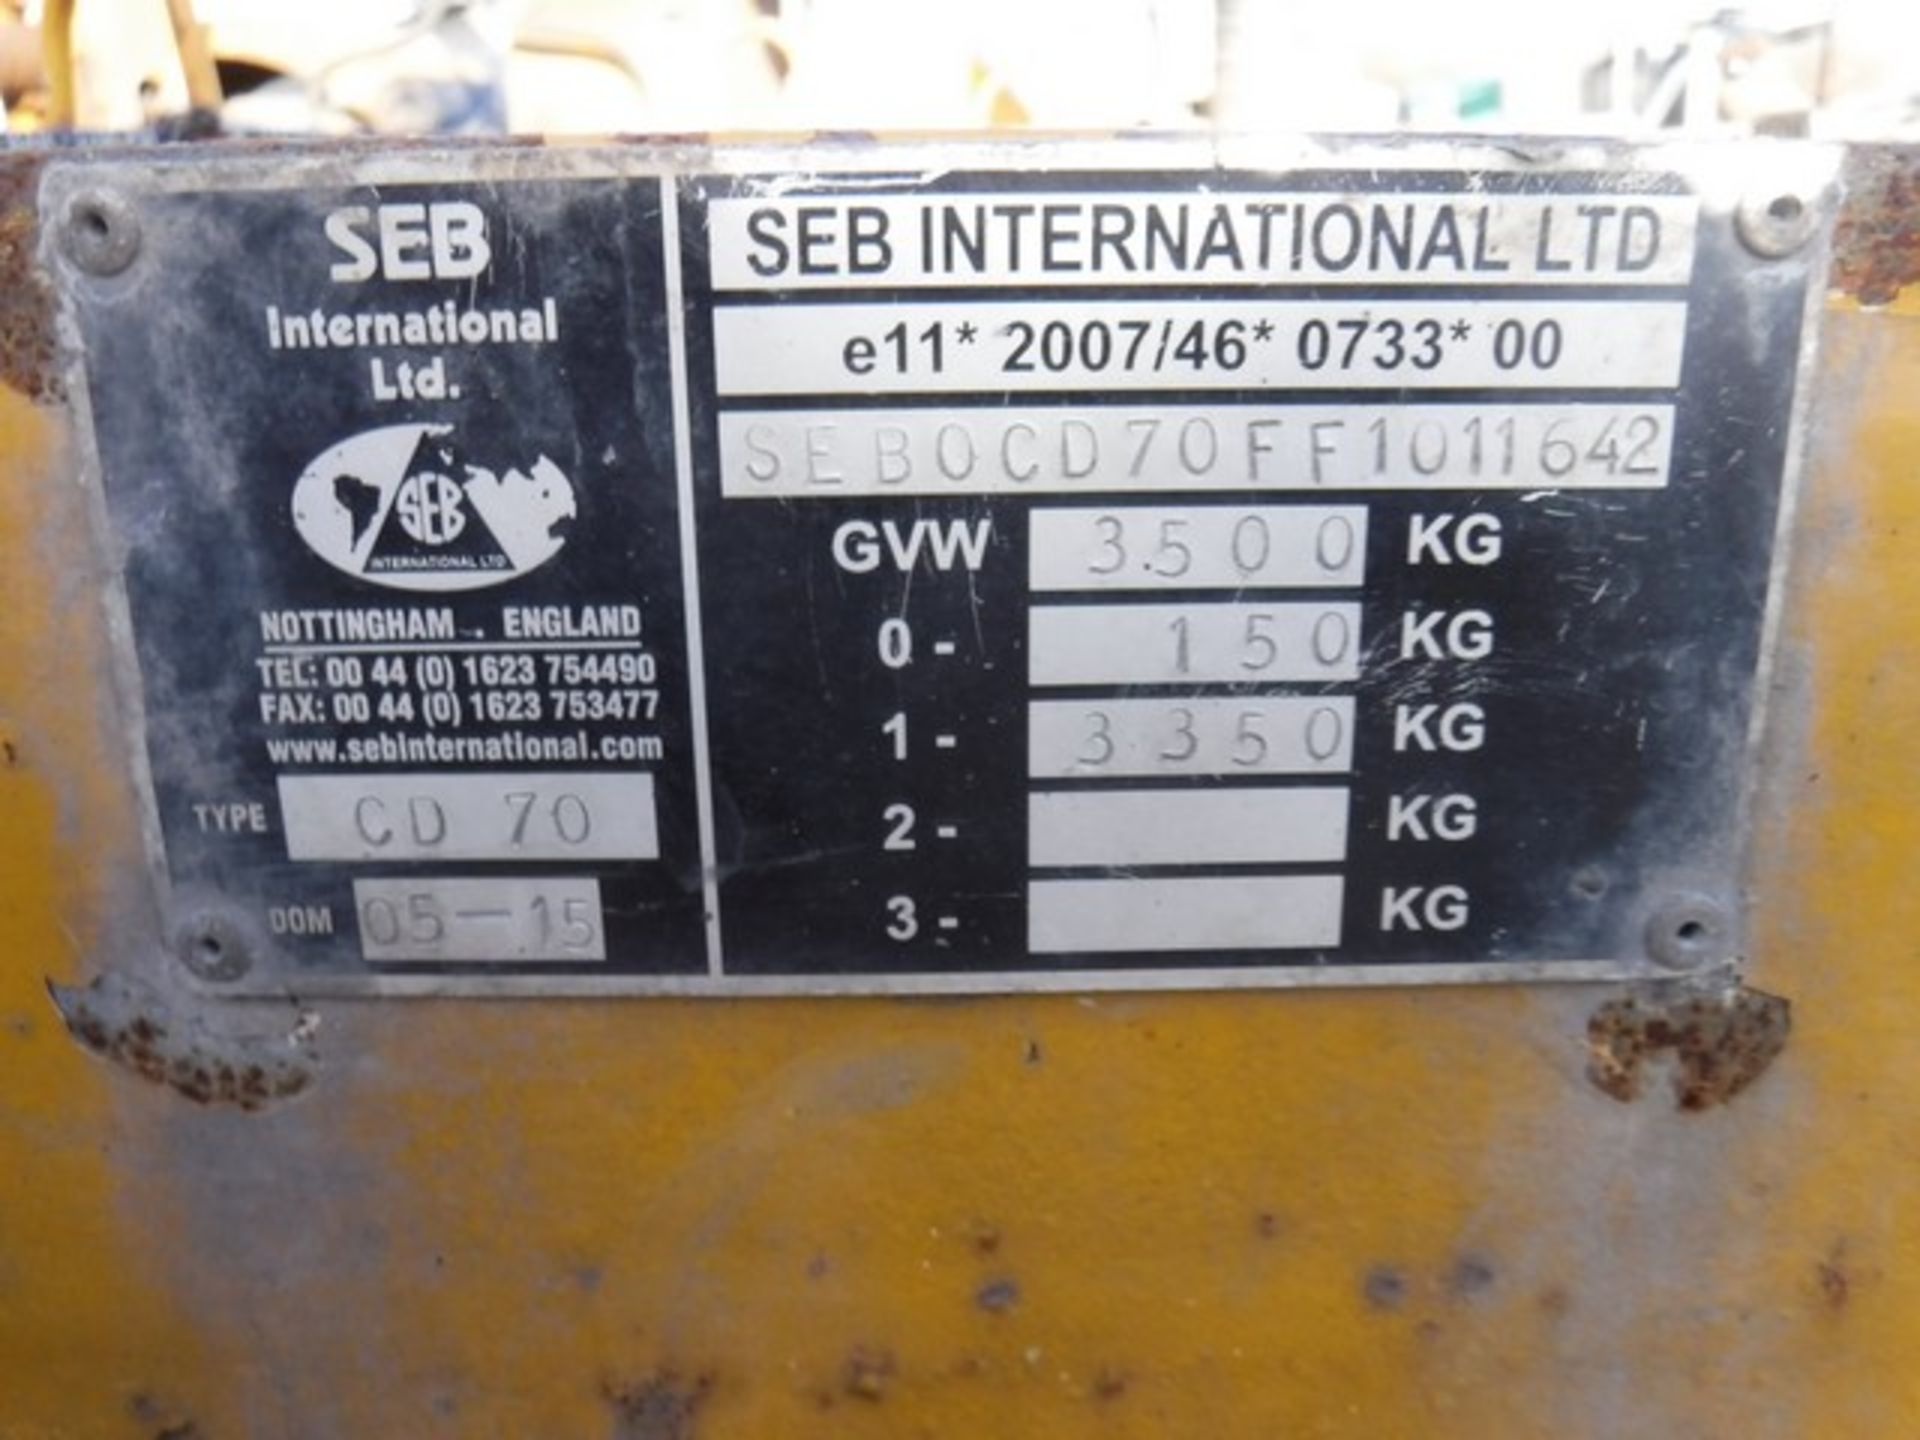 2015 SEB CD70 cable reel trailer S/N CD70FF1011642 Asset No 758-S375 - Image 4 of 5